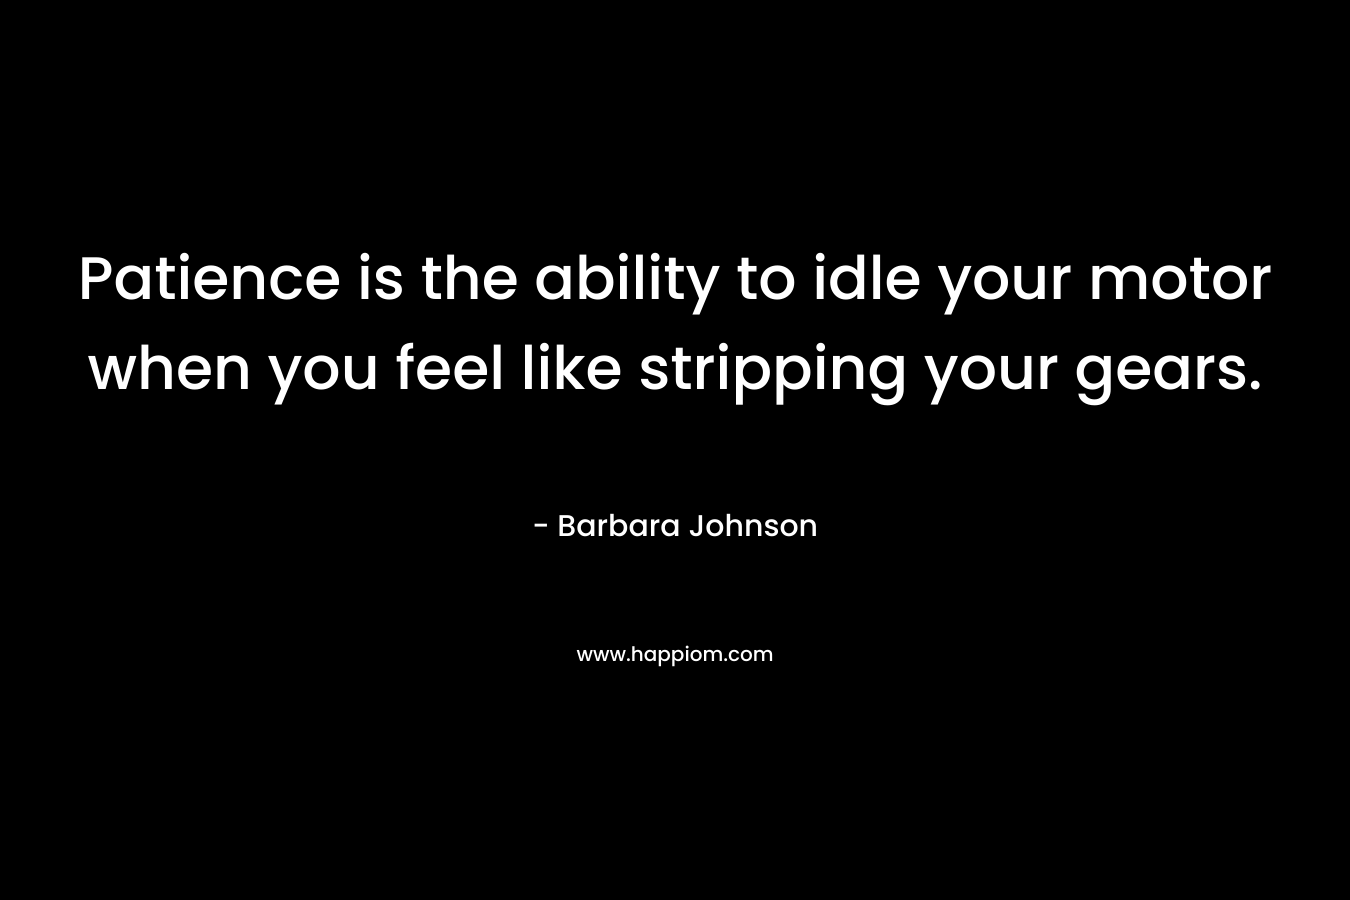 Patience is the ability to idle your motor when you feel like stripping your gears. – Barbara Johnson